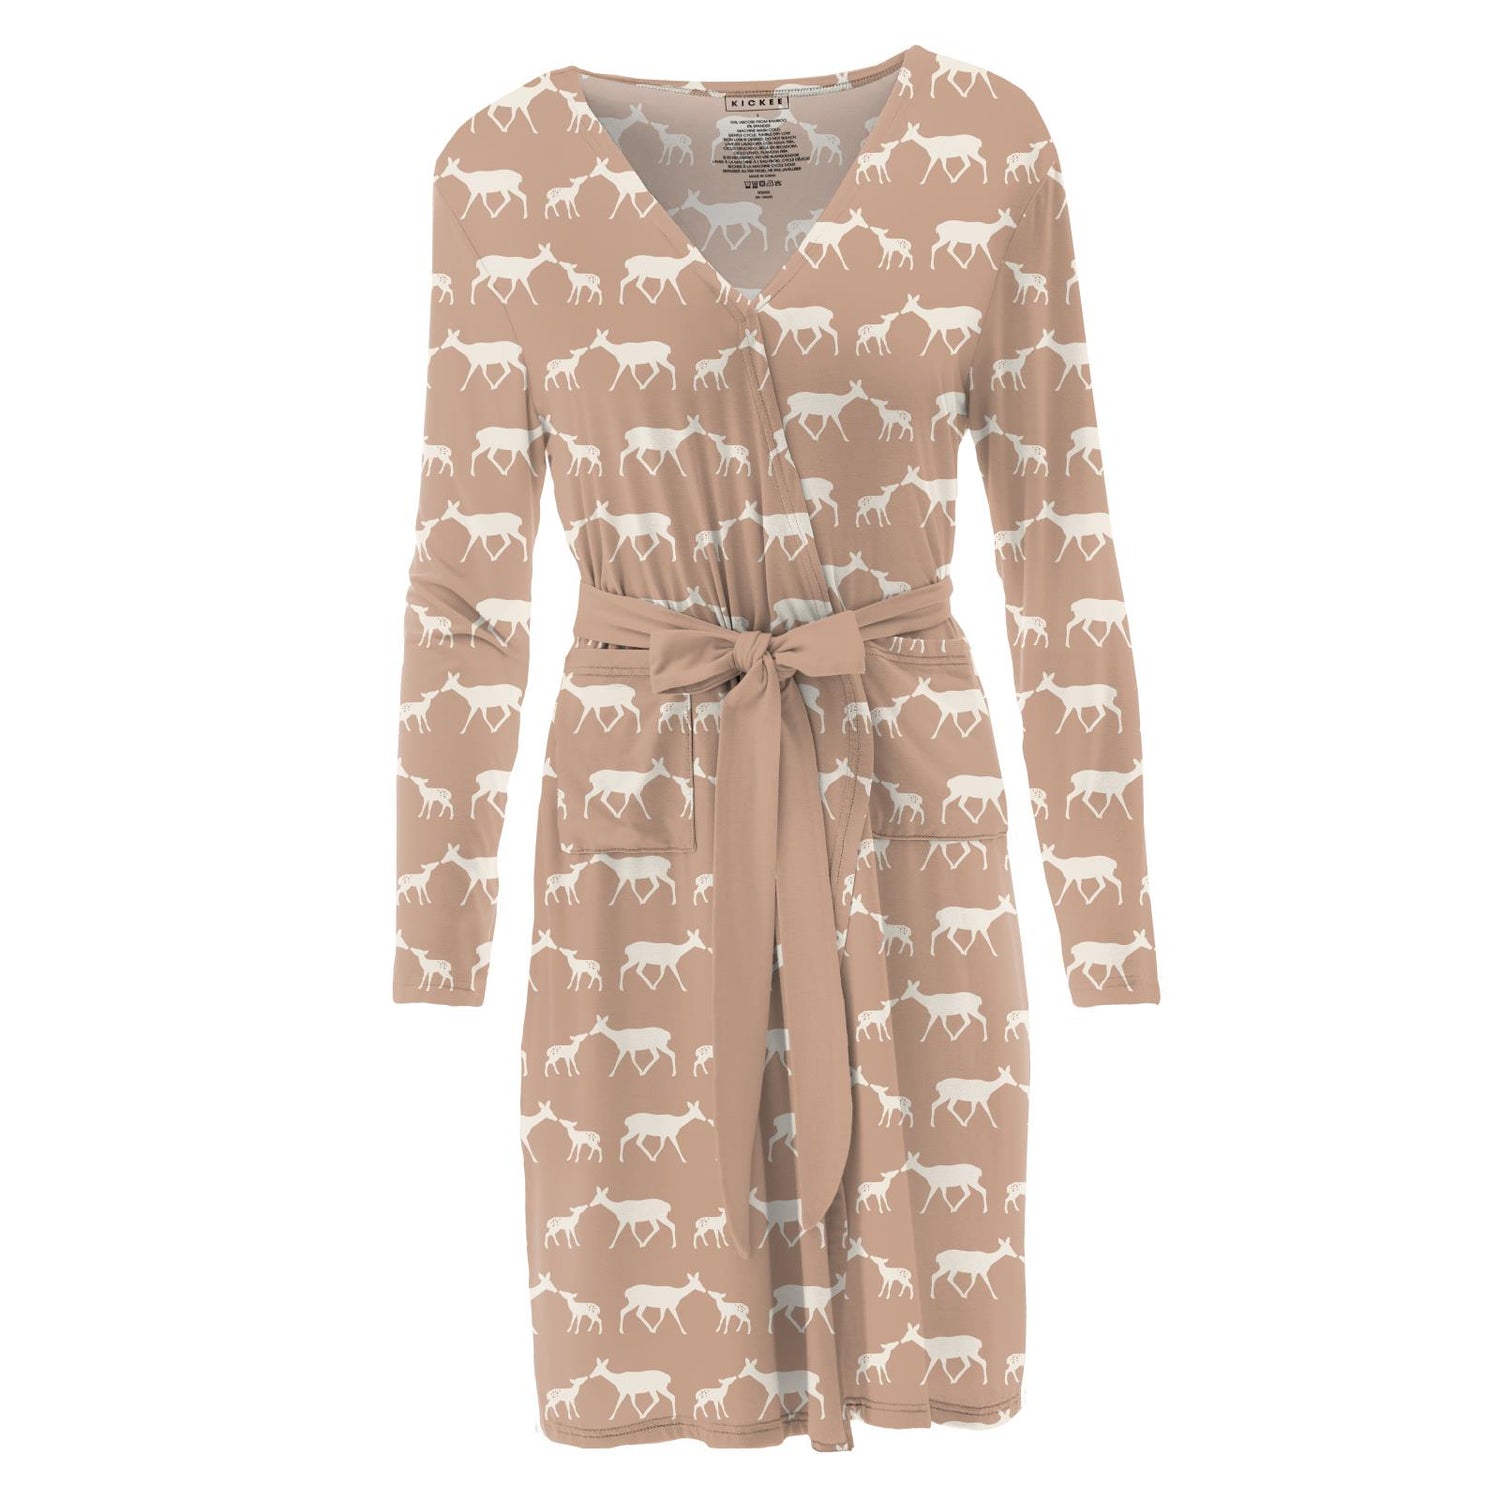 Print Maternity/Nursing Robe in Doe and Fawn